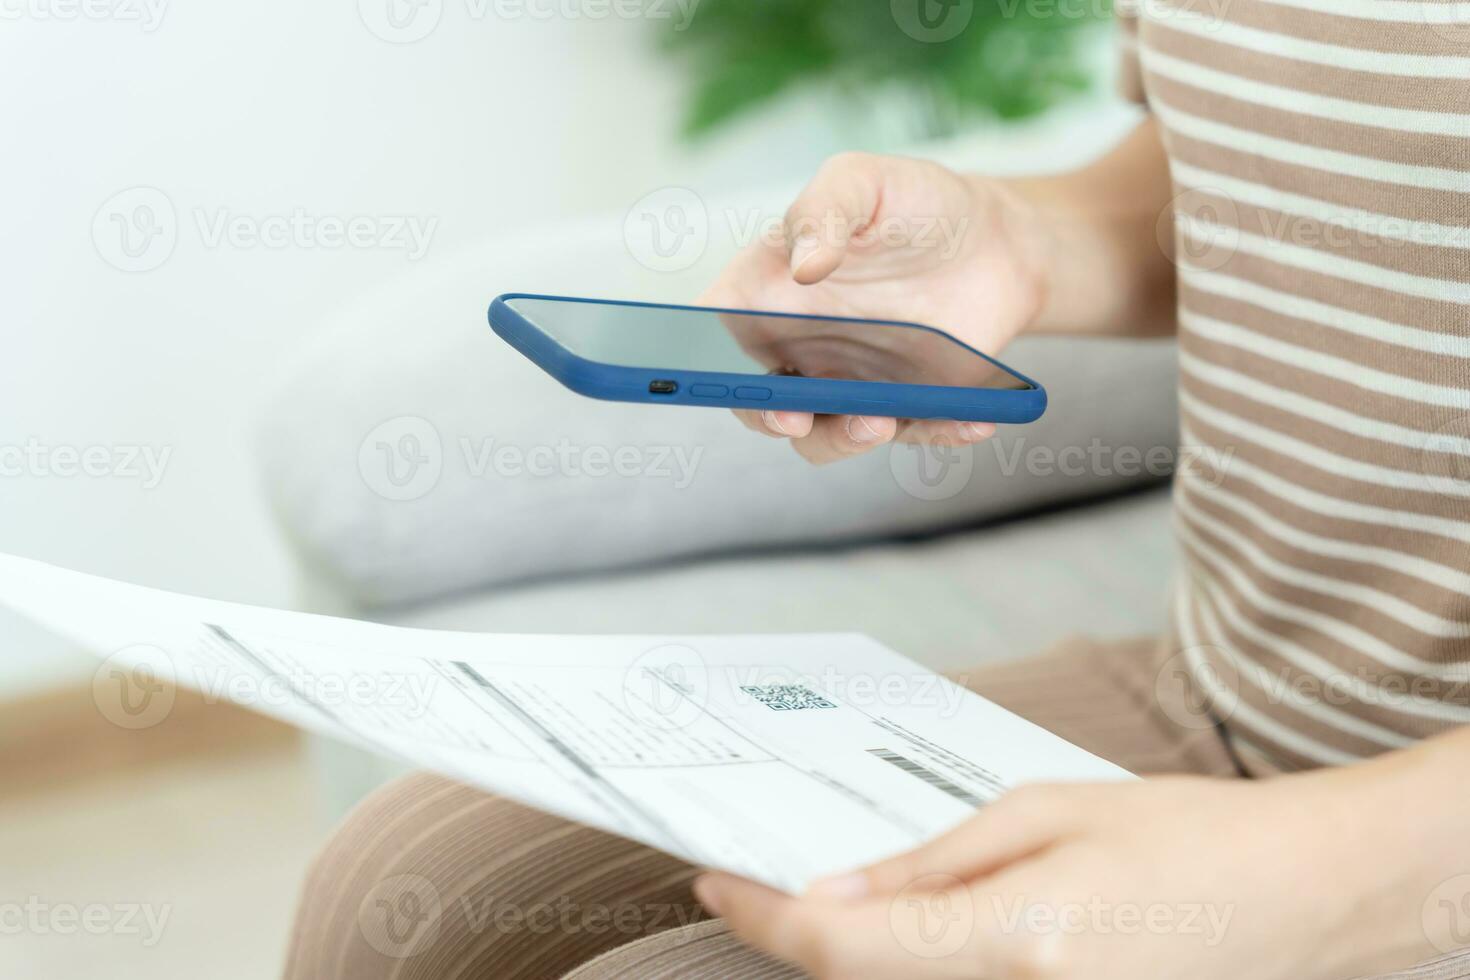 woman use phone scan barcode or QR codes to pay credit card bill after receiving document invoice. payment, receive, paying electricity, digital payments, technology, scanning, financial transactions photo